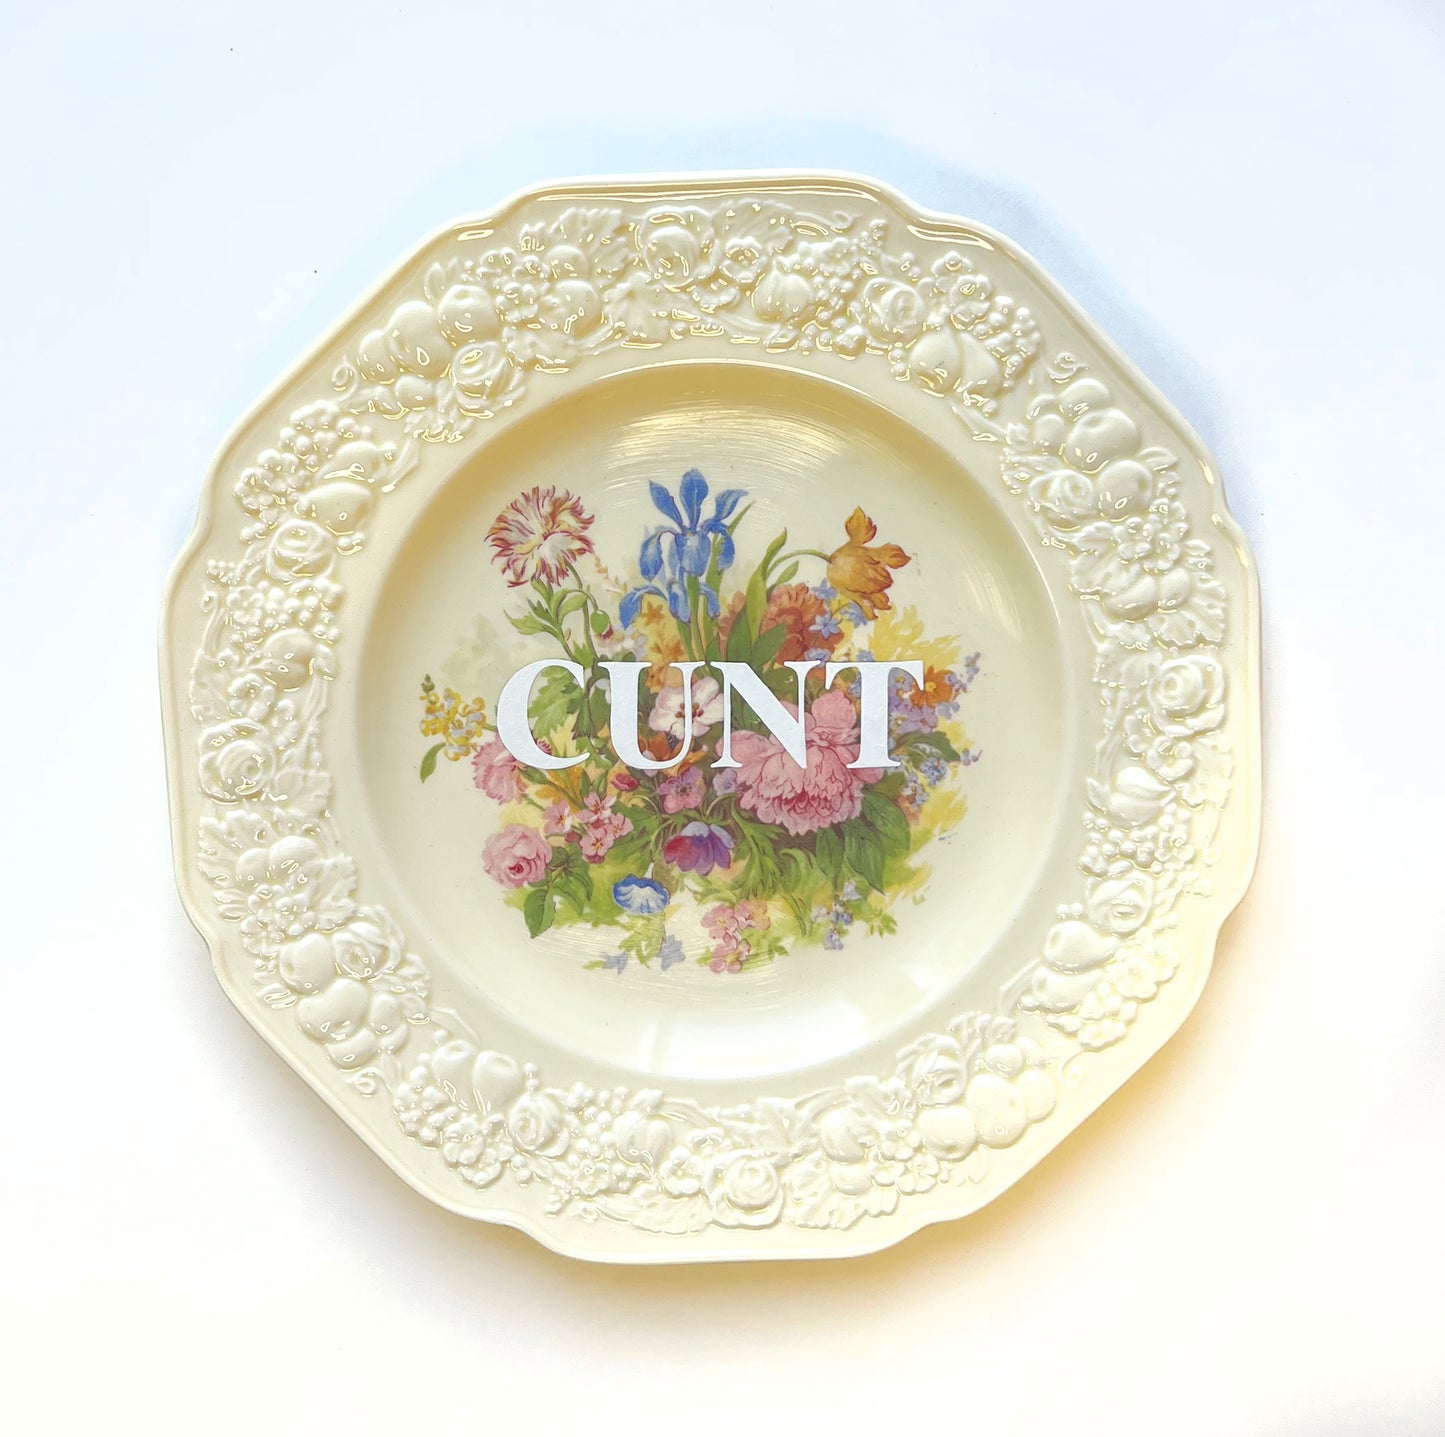  by Marie-Claude Marquis titled Marie-Claude Marquis - "Cunt"